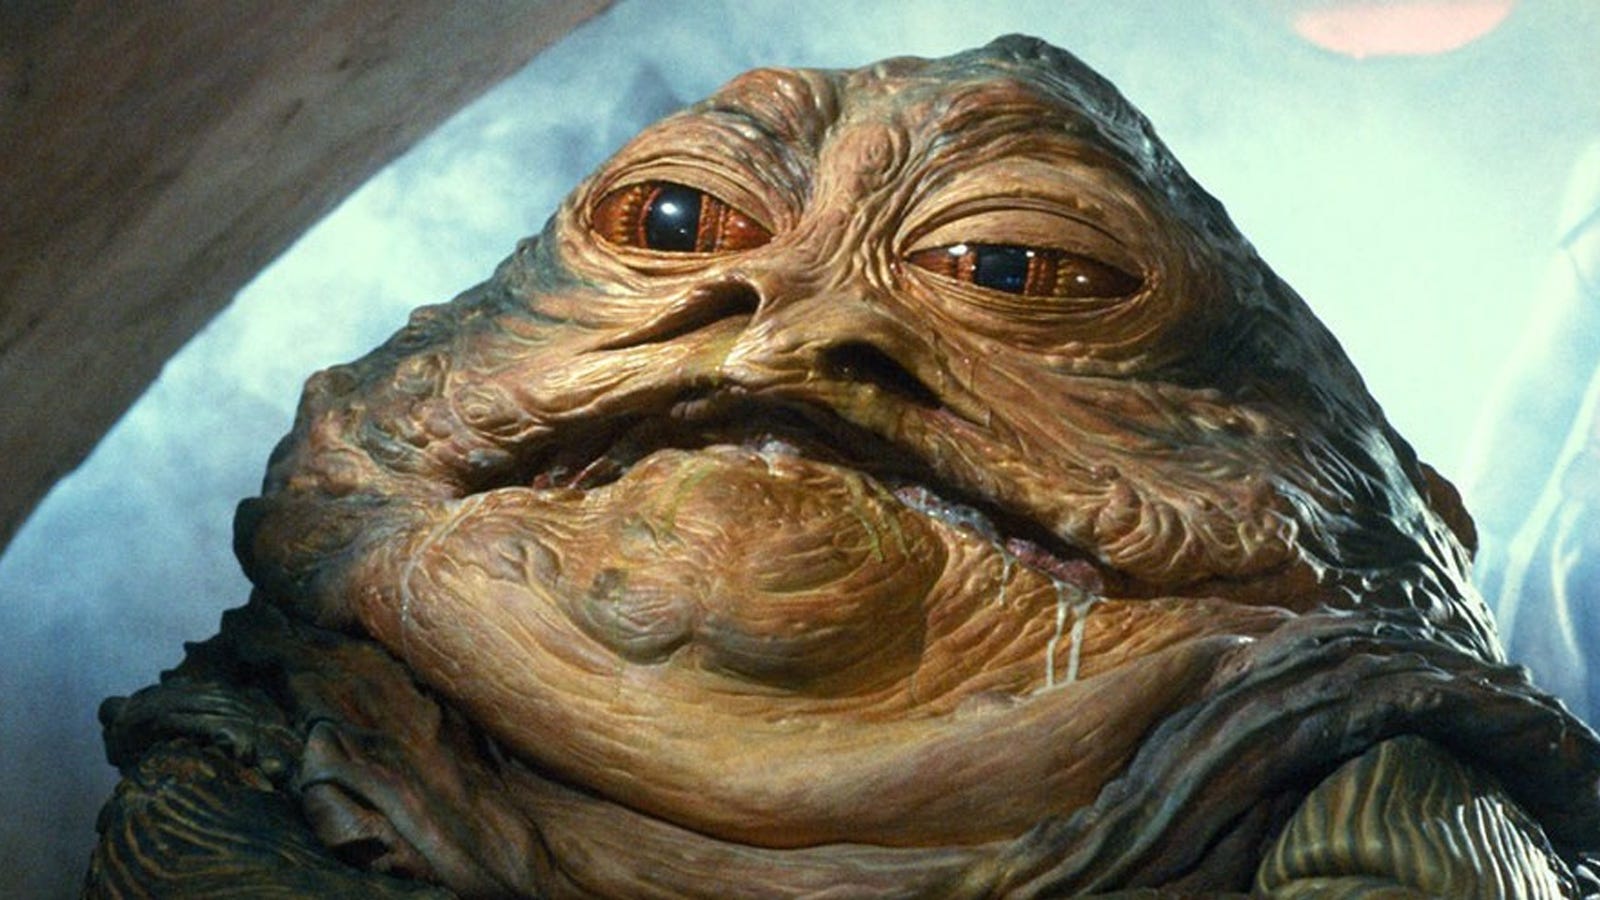 Star Wars Outlaws' pricey extra Jabba the Hutt mission is "optional" and "additional", Ubisoft says